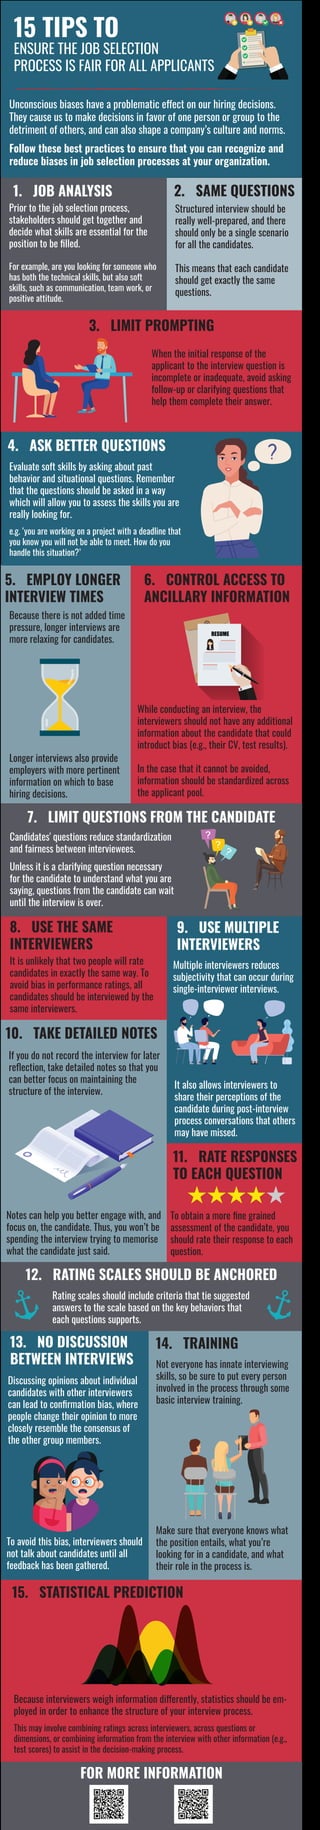 15 TIPS TO
ENSURE THE JOB SELECTION
PROCESS IS FAIR FOR ALL APPLICANTS
Unconscious biases have a problematic effect on our hiring decisions.
They cause us to make decisions in favor of one person or group to the
detriment of others, and can also shape a company’s culture and norms.
Follow these best practices to ensure that you can recognize and
reduce biases in job selection processes at your organization.
3. LIMIT PROMPTING
2. SAME QUESTIONS
Structured interview should be
really well-prepared, and there
should only be a single scenario
for all the candidates.
This means that each candidate
should get exactly the same
questions.
1. JOB ANALYSIS
Prior to the job selection process,
stakeholders should get together and
decide what skills are essential for the
position to be ﬁlled.
For example, are you looking for someone who
has both the technical skills, but also soft
skills, such as communication, team work, or
positive attitude.
When the initial response of the
applicant to the interview question is
incomplete or inadequate, avoid asking
follow-up or clarifying questions that
help them complete their answer.
4. ASK BETTER QUESTIONS
Evaluate soft skills by asking about past
behavior and situational questions. Remember
that the questions should be asked in a way
which will allow you to assess the skills you are
really looking for.
e.g. ‘you are working on a project with a deadline that
you know you will not be able to meet. How do you
handle this situation?’
5. EMPLOY LONGER
INTERVIEW TIMES
Because there is not added time
pressure, longer interviews are
more relaxing for candidates.
Longer interviews also provide
employers with more pertinent
information on which to base
hiring decisions.
6. CONTROL ACCESS TO
ANCILLARY INFORMATION
While conducting an interview, the
interviewers should not have any additional
information about the candidate that could
introduct bias (e.g., their CV, test results).
In the case that it cannot be avoided,
information should be standardized across
the applicant pool.
7. LIMIT QUESTIONS FROM THE CANDIDATE
Candidates' questions reduce standardization
and fairness between interviewees.
Unless it is a clarifying question necessary
for the candidate to understand what you are
saying, questions from the candidate can wait
until the interview is over.
8. USE THE SAME
INTERVIEWERS
It is unlikely that two people will rate
candidates in exactly the same way. To
avoid bias in performance ratings, all
candidates should be interviewed by the
same interviewers.
9. USE MULTIPLE
INTERVIEWERS
Multiple interviewers reduces
subjectivity that can occur during
single-interviewer interviews.
It also allows interviewers to
share their perceptions of the
candidate during post-interview
process conversations that others
may have missed.
10. TAKE DETAILED NOTES
If you do not record the interview for later
reﬂection, take detailed notes so that you
can better focus on maintaining the
structure of the interview.
11. RATE RESPONSES
TO EACH QUESTION
To obtain a more ﬁne grained
assessment of the candidate, you
should rate their response to each
question.
Notes can help you better engage with, and
focus on, the candidate. Thus, you won’t be
spending the interview trying to memorise
what the candidate just said.
12. RATING SCALES SHOULD BE ANCHORED
Rating scales should include criteria that tie suggested
answers to the scale based on the key behaviors that
each questions supports.
13. NO DISCUSSION
BETWEEN INTERVIEWS
Discussing opinions about individual
candidates with other interviewers
can lead to conﬁrmation bias, where
people change their opinion to more
closely resemble the consensus of
the other group members.
To avoid this bias, interviewers should
not talk about candidates until all
feedback has been gathered.
14. TRAINING
Not everyone has innate interviewing
skills, so be sure to put every person
involved in the process through some
basic interview training.
Make sure that everyone knows what
the position entails, what you’re
looking for in a candidate, and what
their role in the process is.
15. STATISTICAL PREDICTION
Because interviewers weigh information differently, statistics should be em-
ployed in order to enhance the structure of your interview process.
This may involve combining ratings across interviewers, across questions or
dimensions, or combining information from the interview with other information (e.g.,
test scores) to assist in the decision-making process.
FOR MORE INFORMATION
 